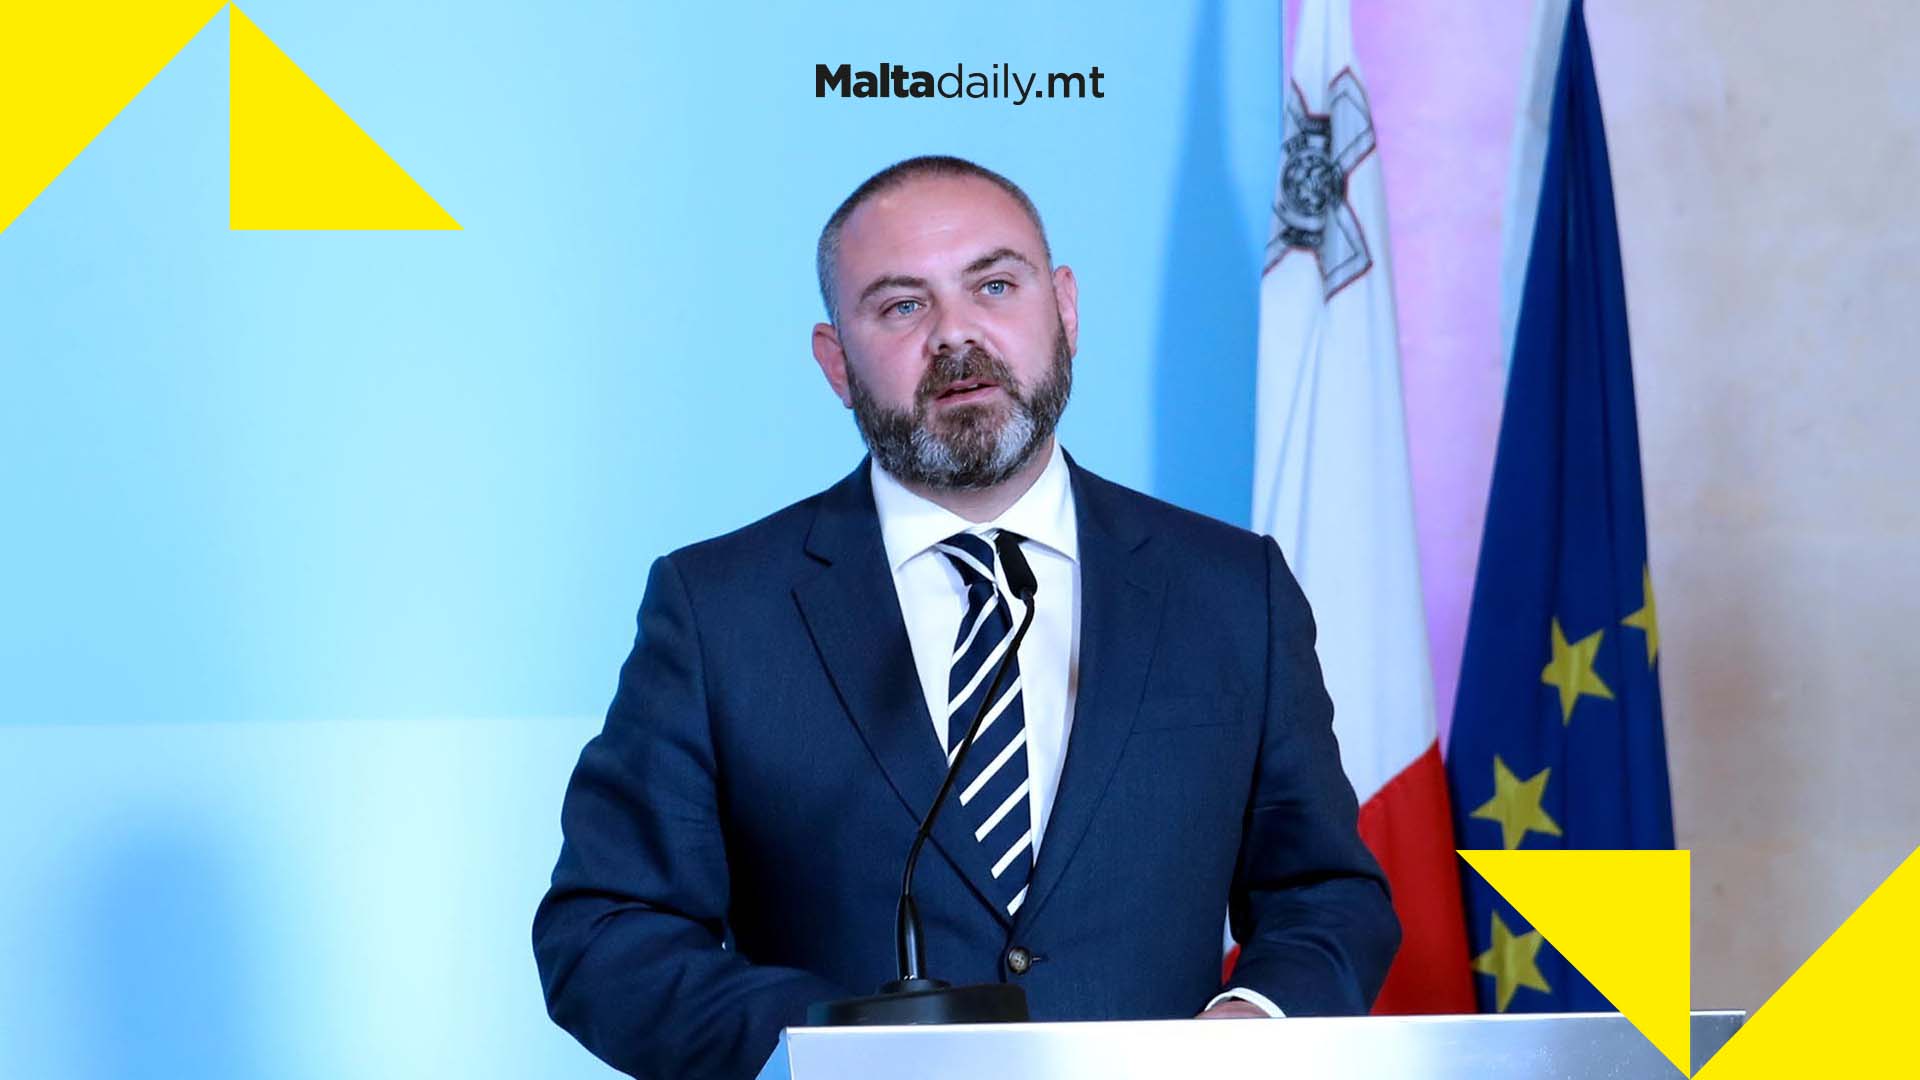 Malta constitutes the national node for the European Research Infrastructure for Heritage Science